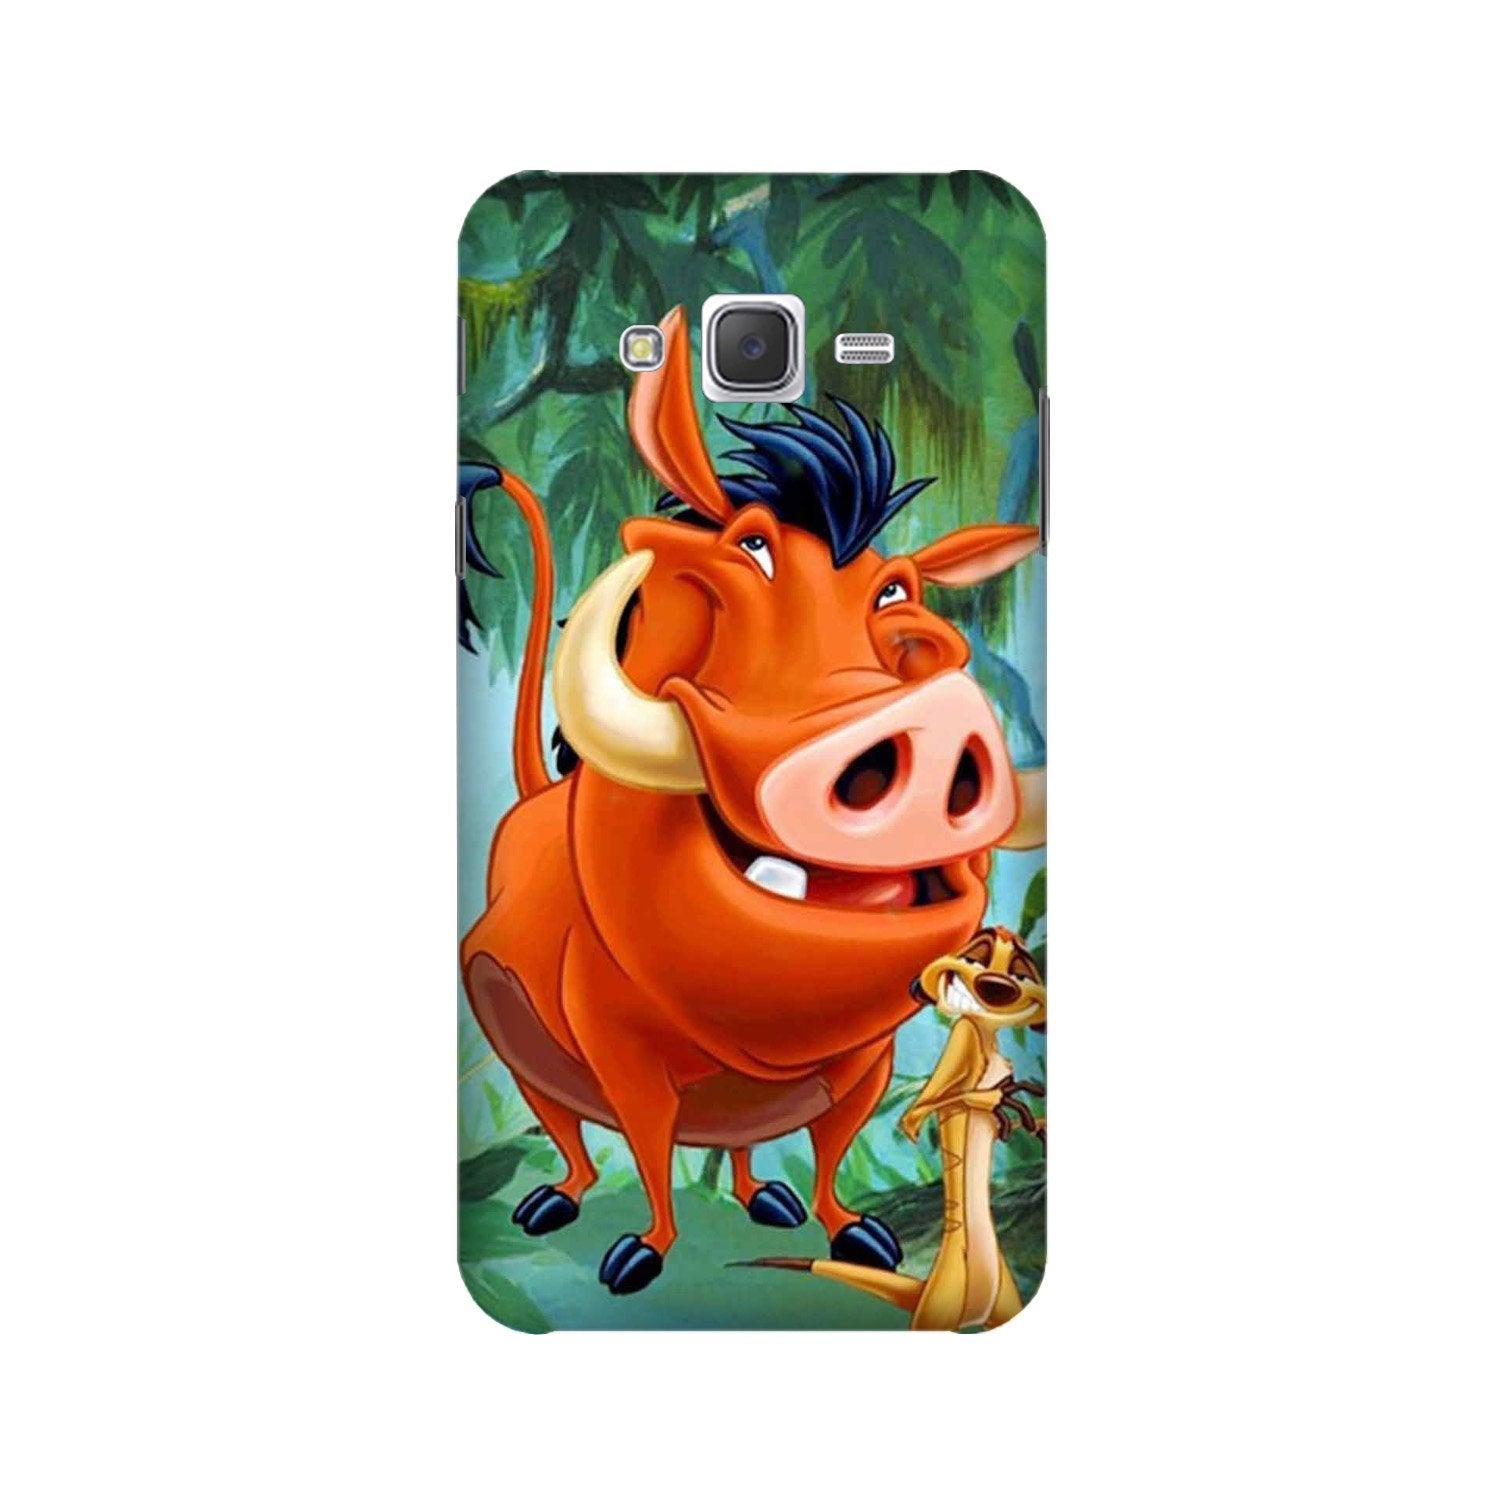 Timon and Pumbaa Mobile Back Case for Galaxy J7 (2015) (Design - 305)